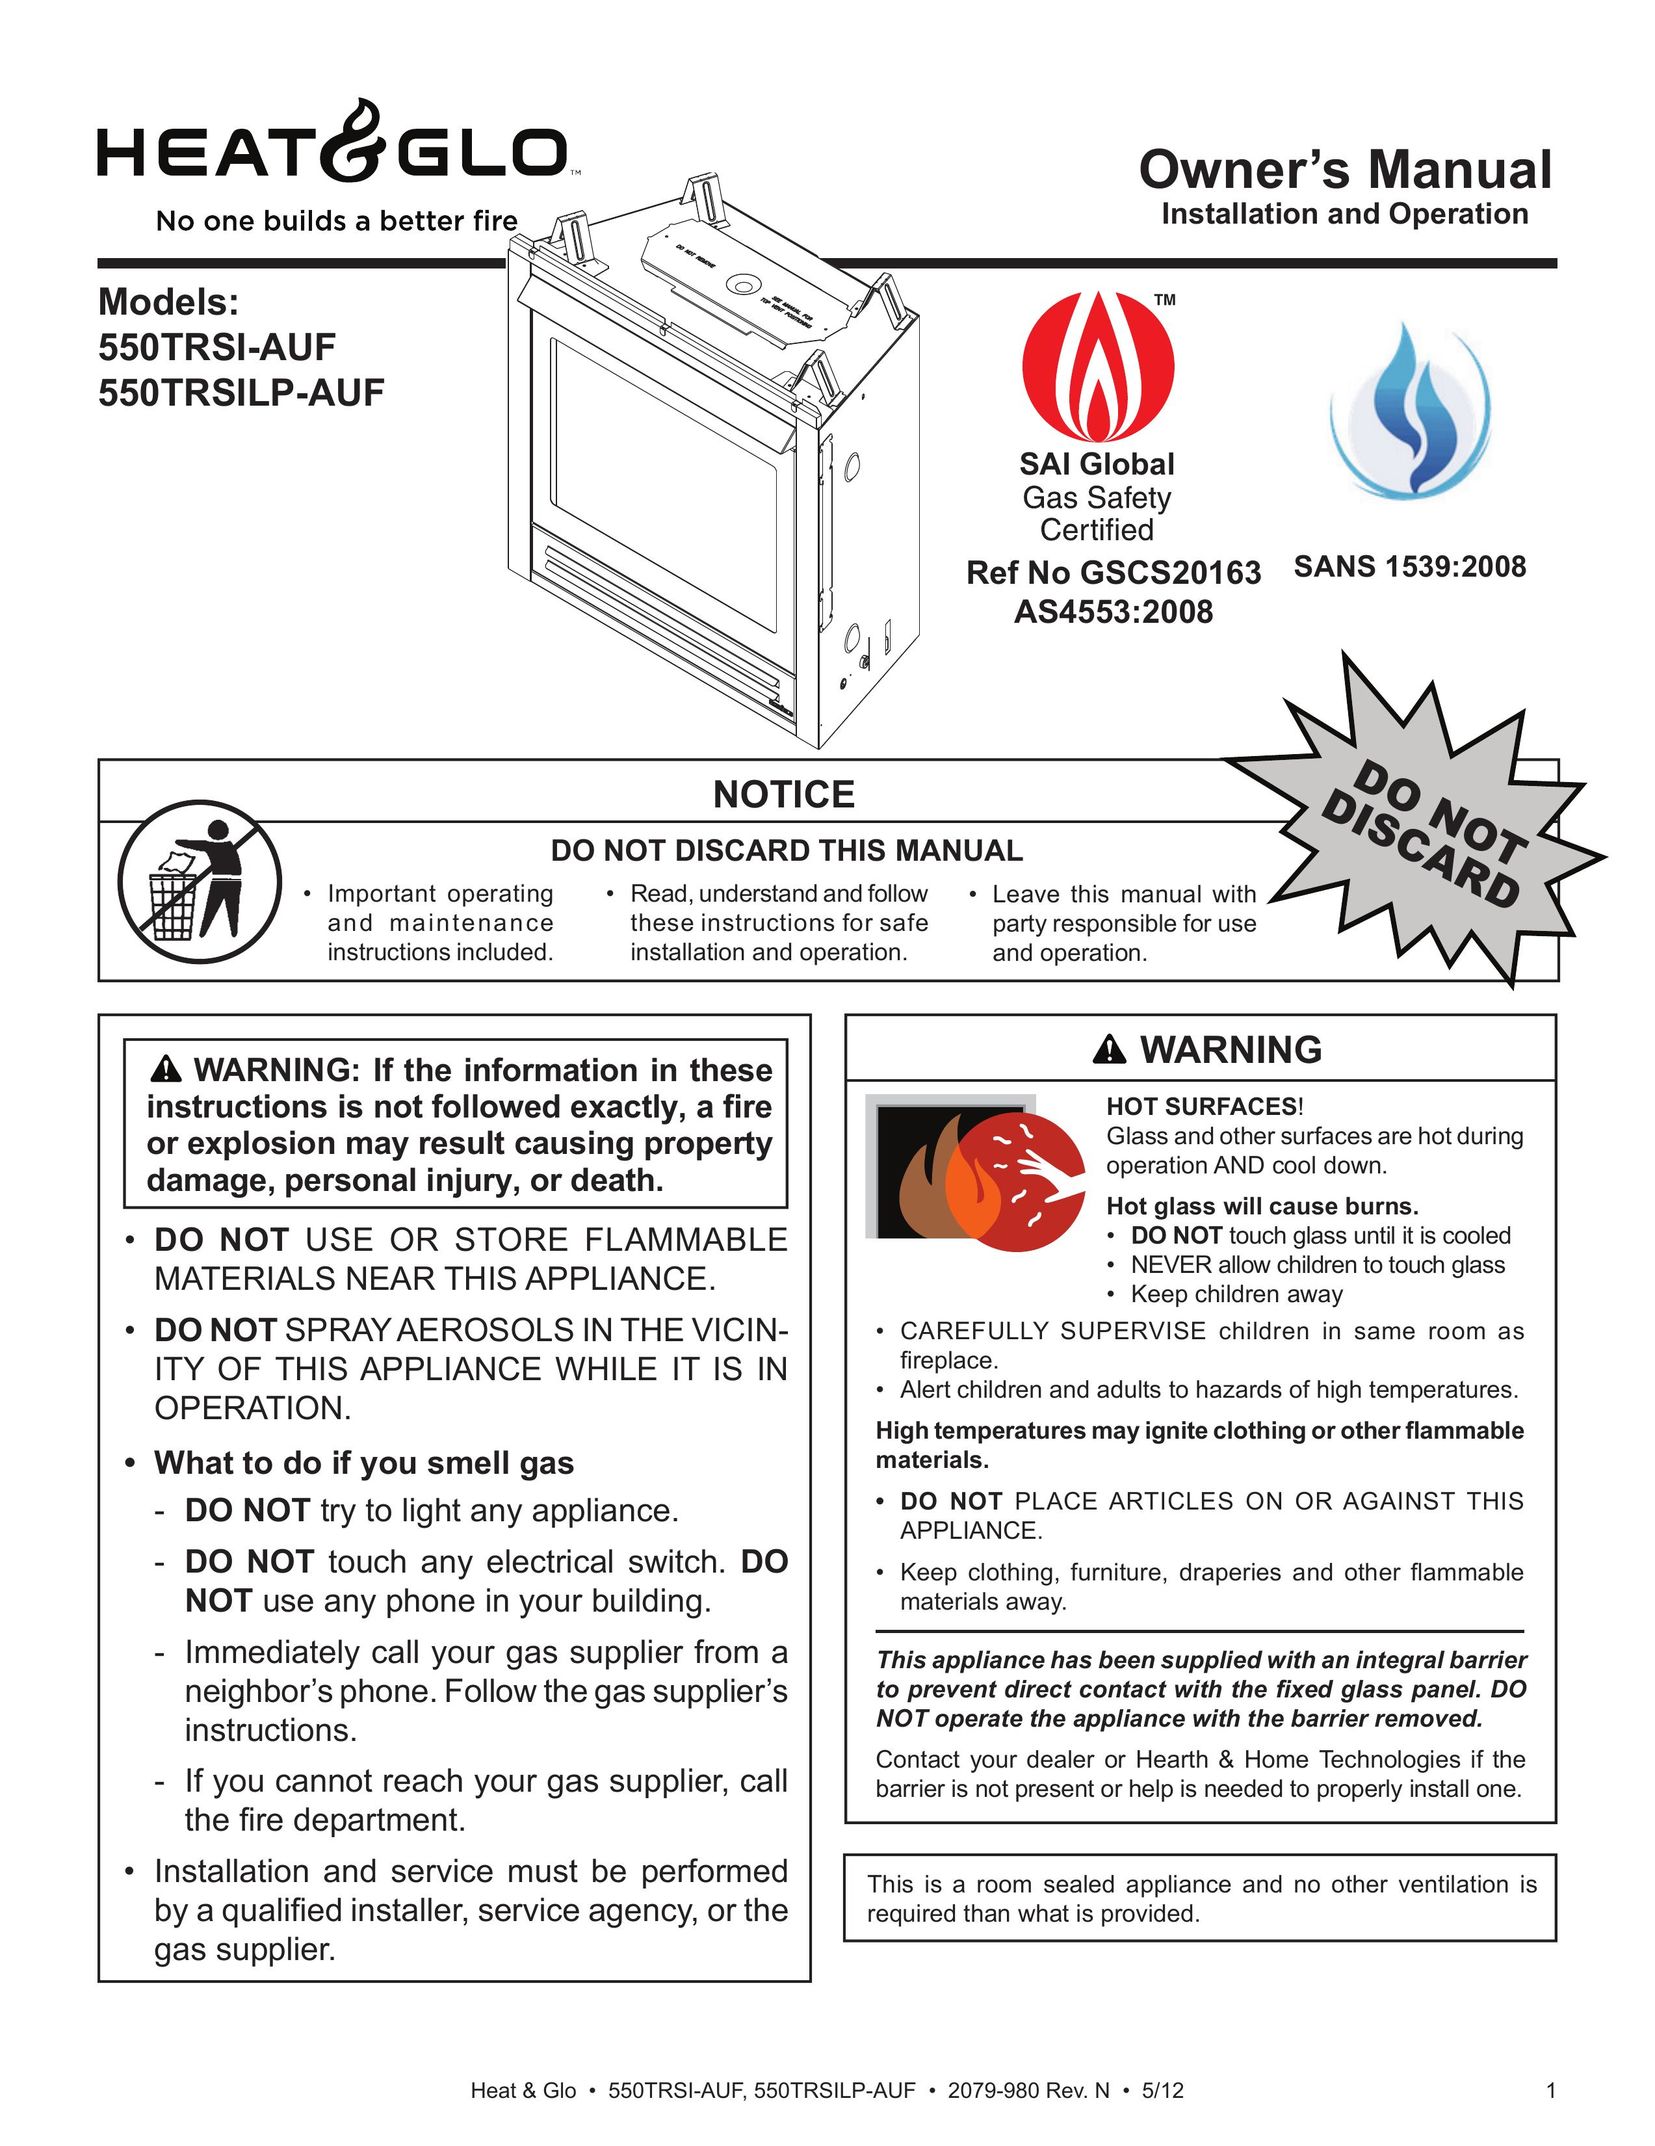 Heat & Glo LifeStyle 550TRSI-AUF Indoor Fireplace User Manual